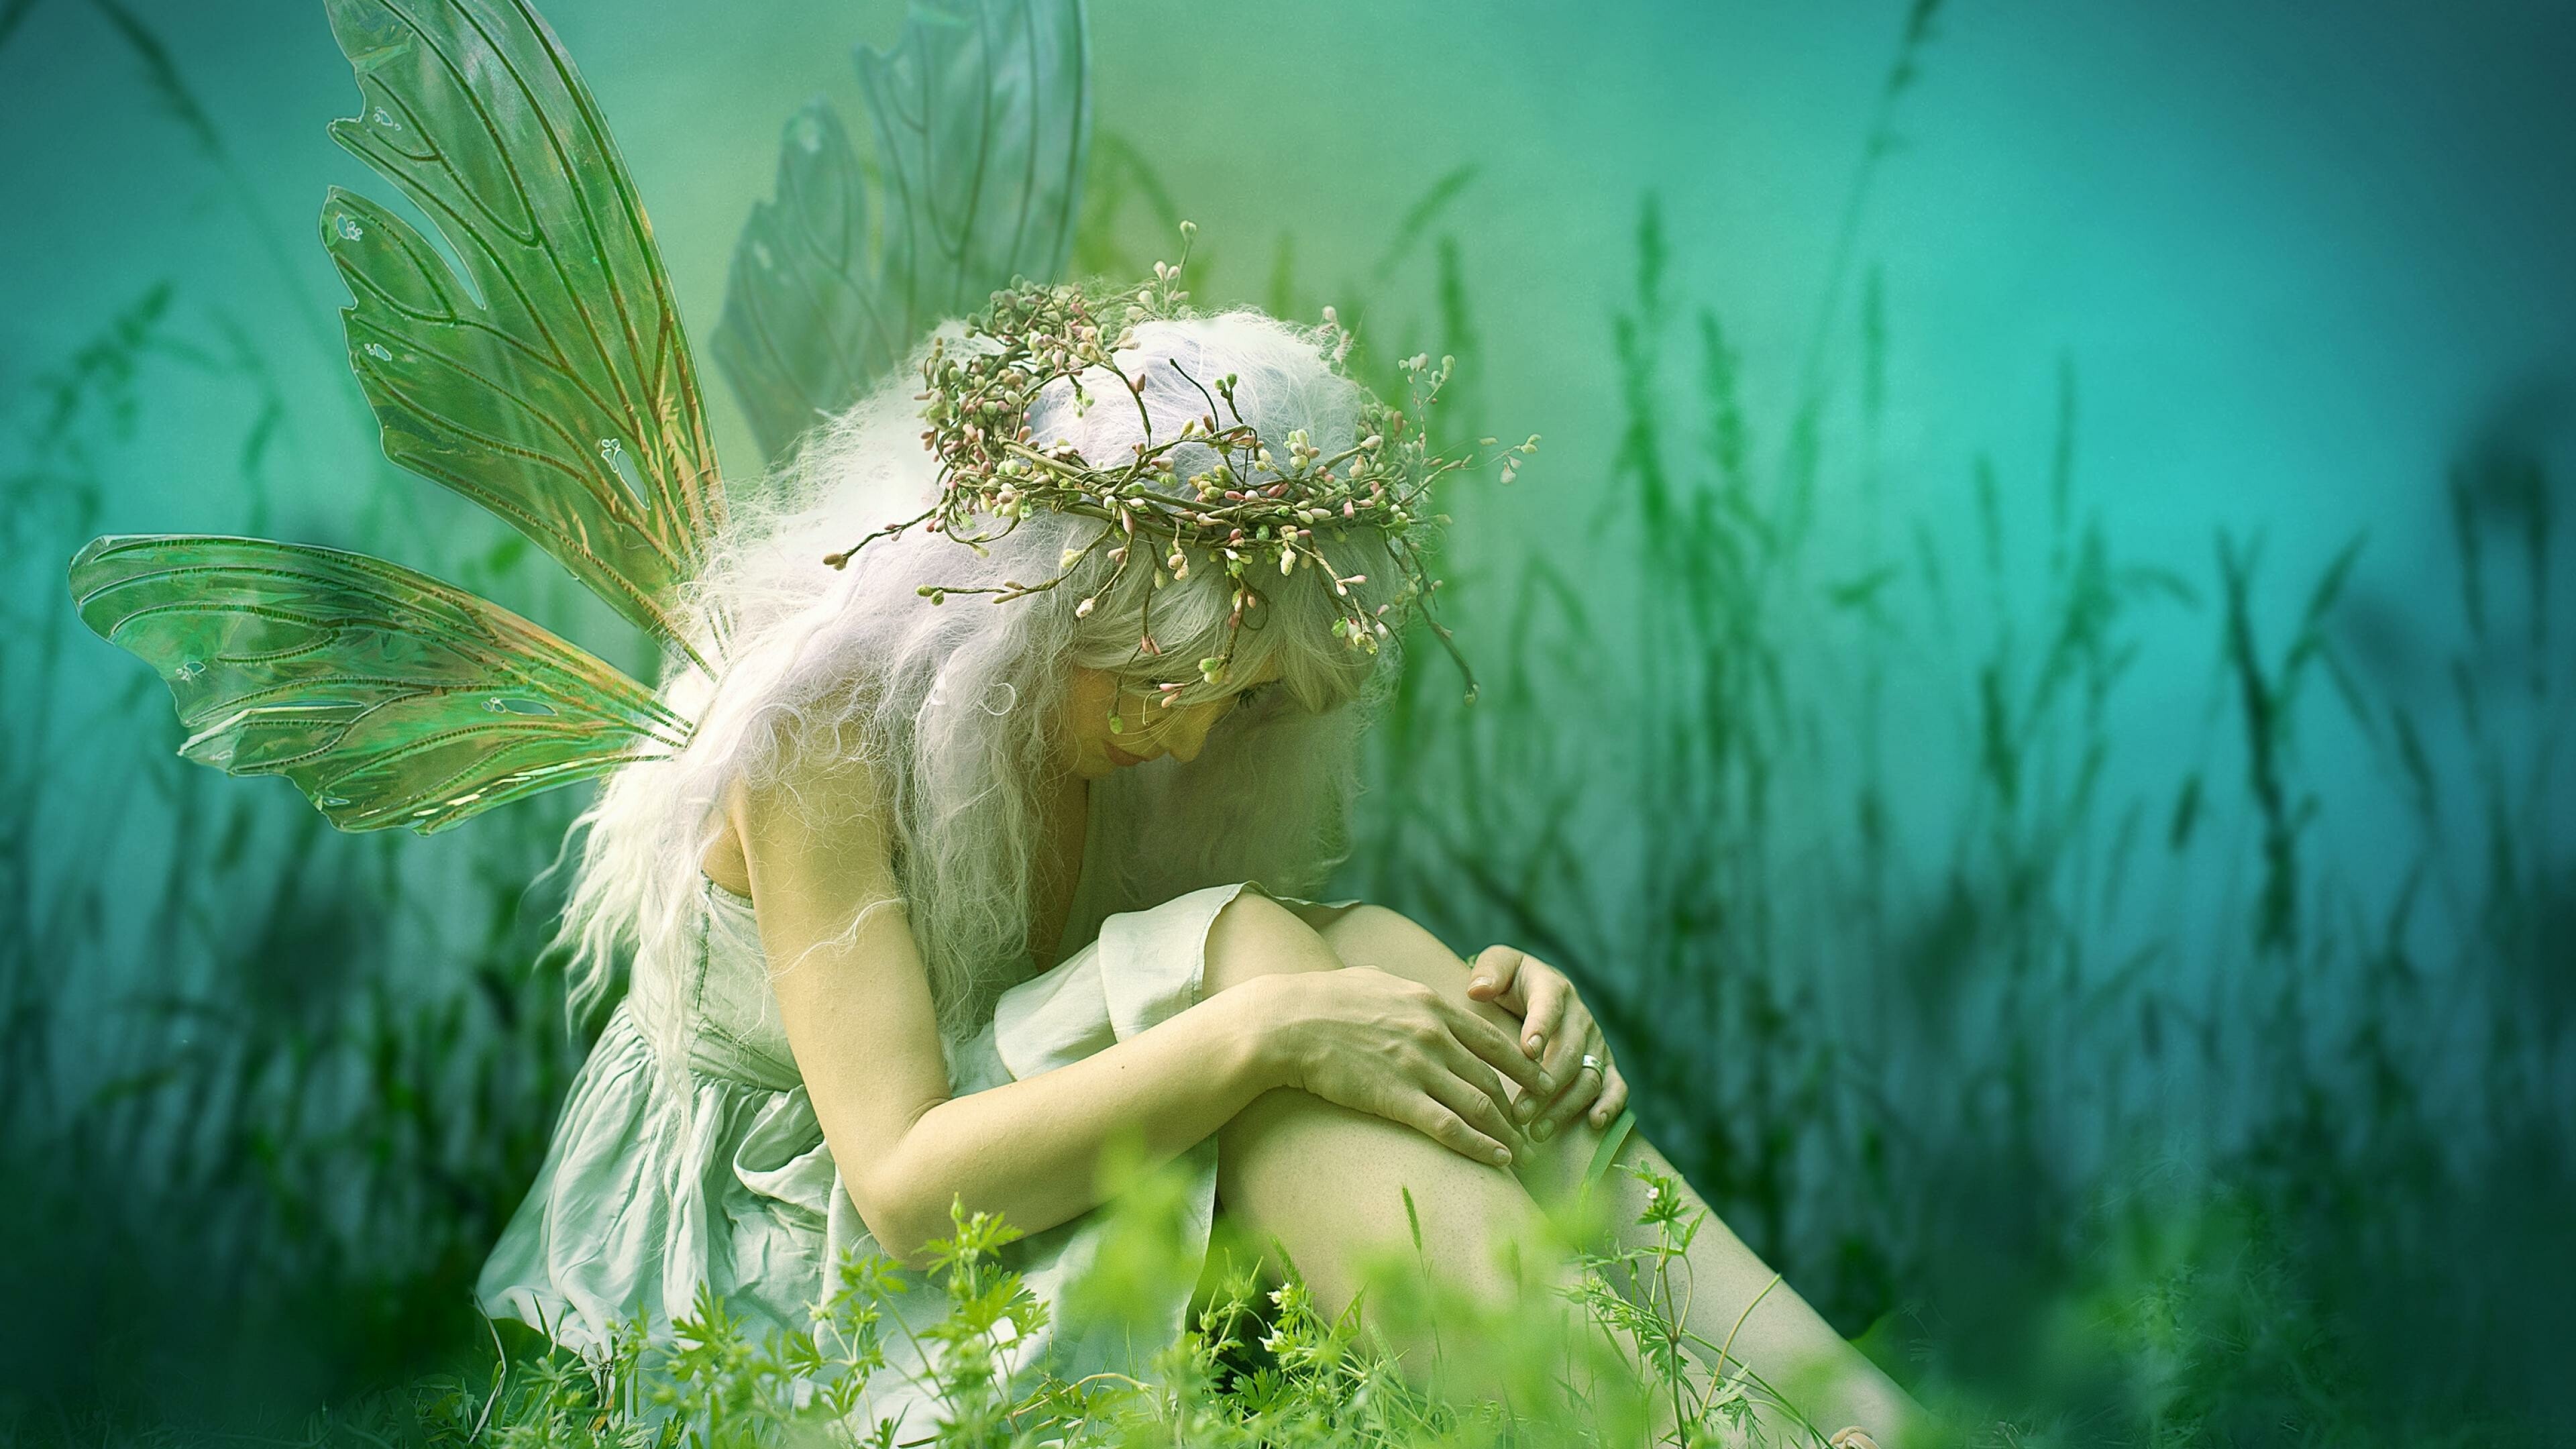 Fairy: Fae Folk, live within the trees, with wings that blend with the leaves. 3840x2160 4K Background.